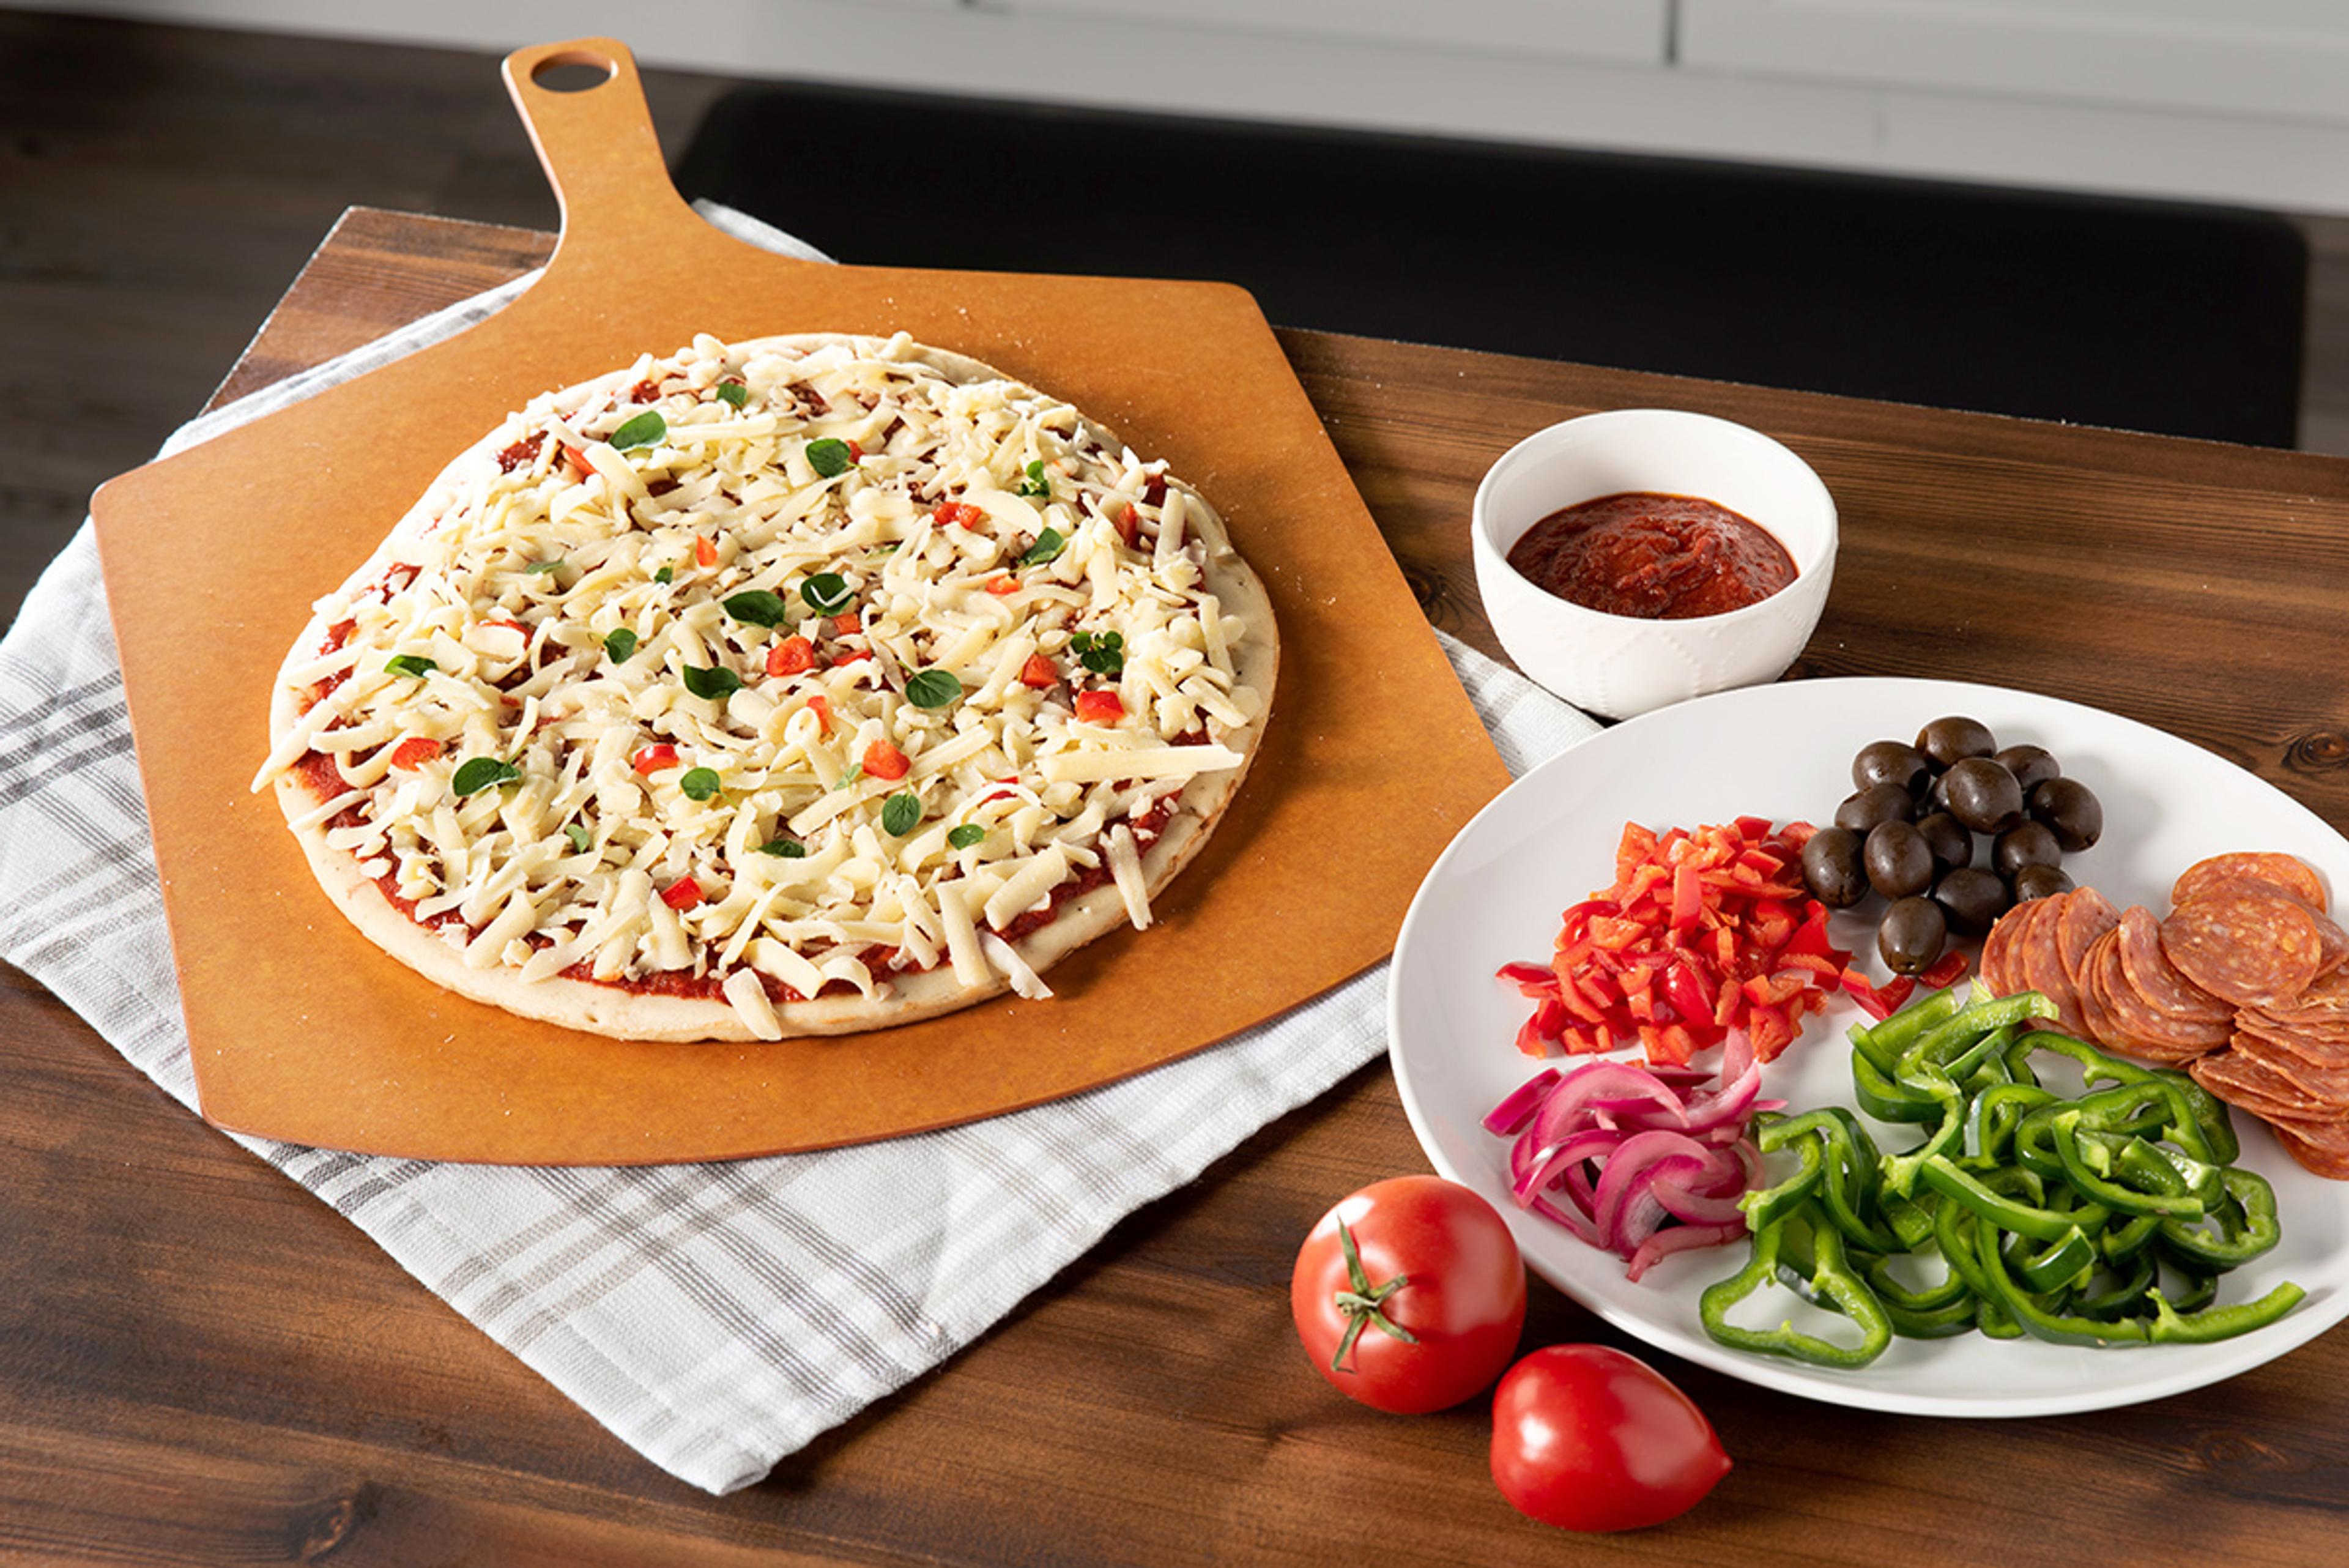 An unbaked pizza sits on a pizza peel with a plate of toppings sitting next to it.